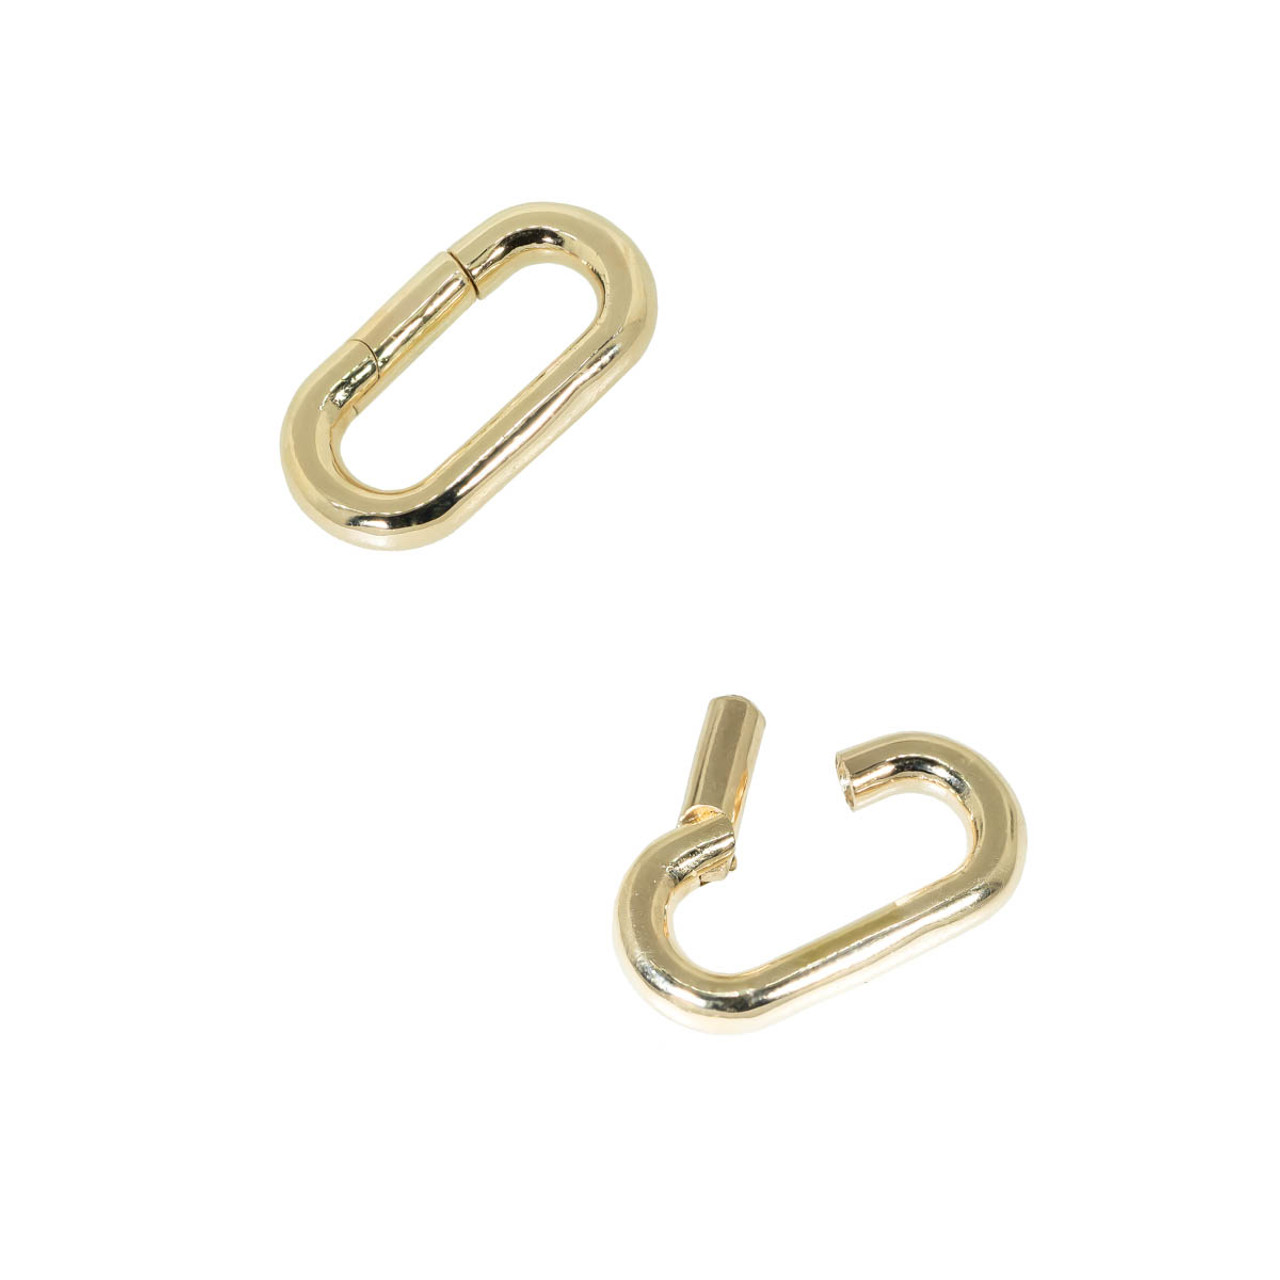 Gold Charm Holder Connector Clip